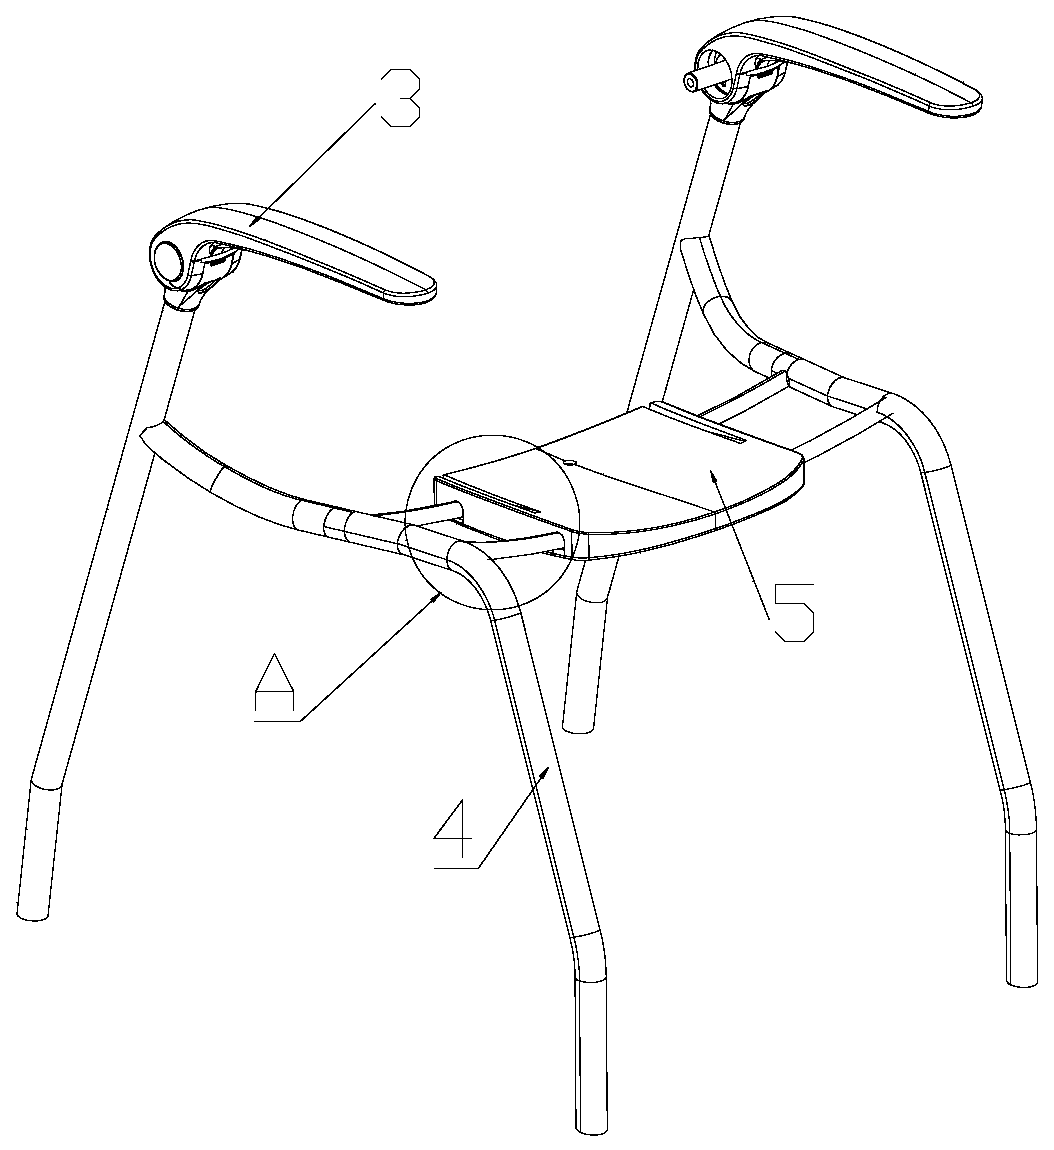 Seat and back linkage adjusting type chair